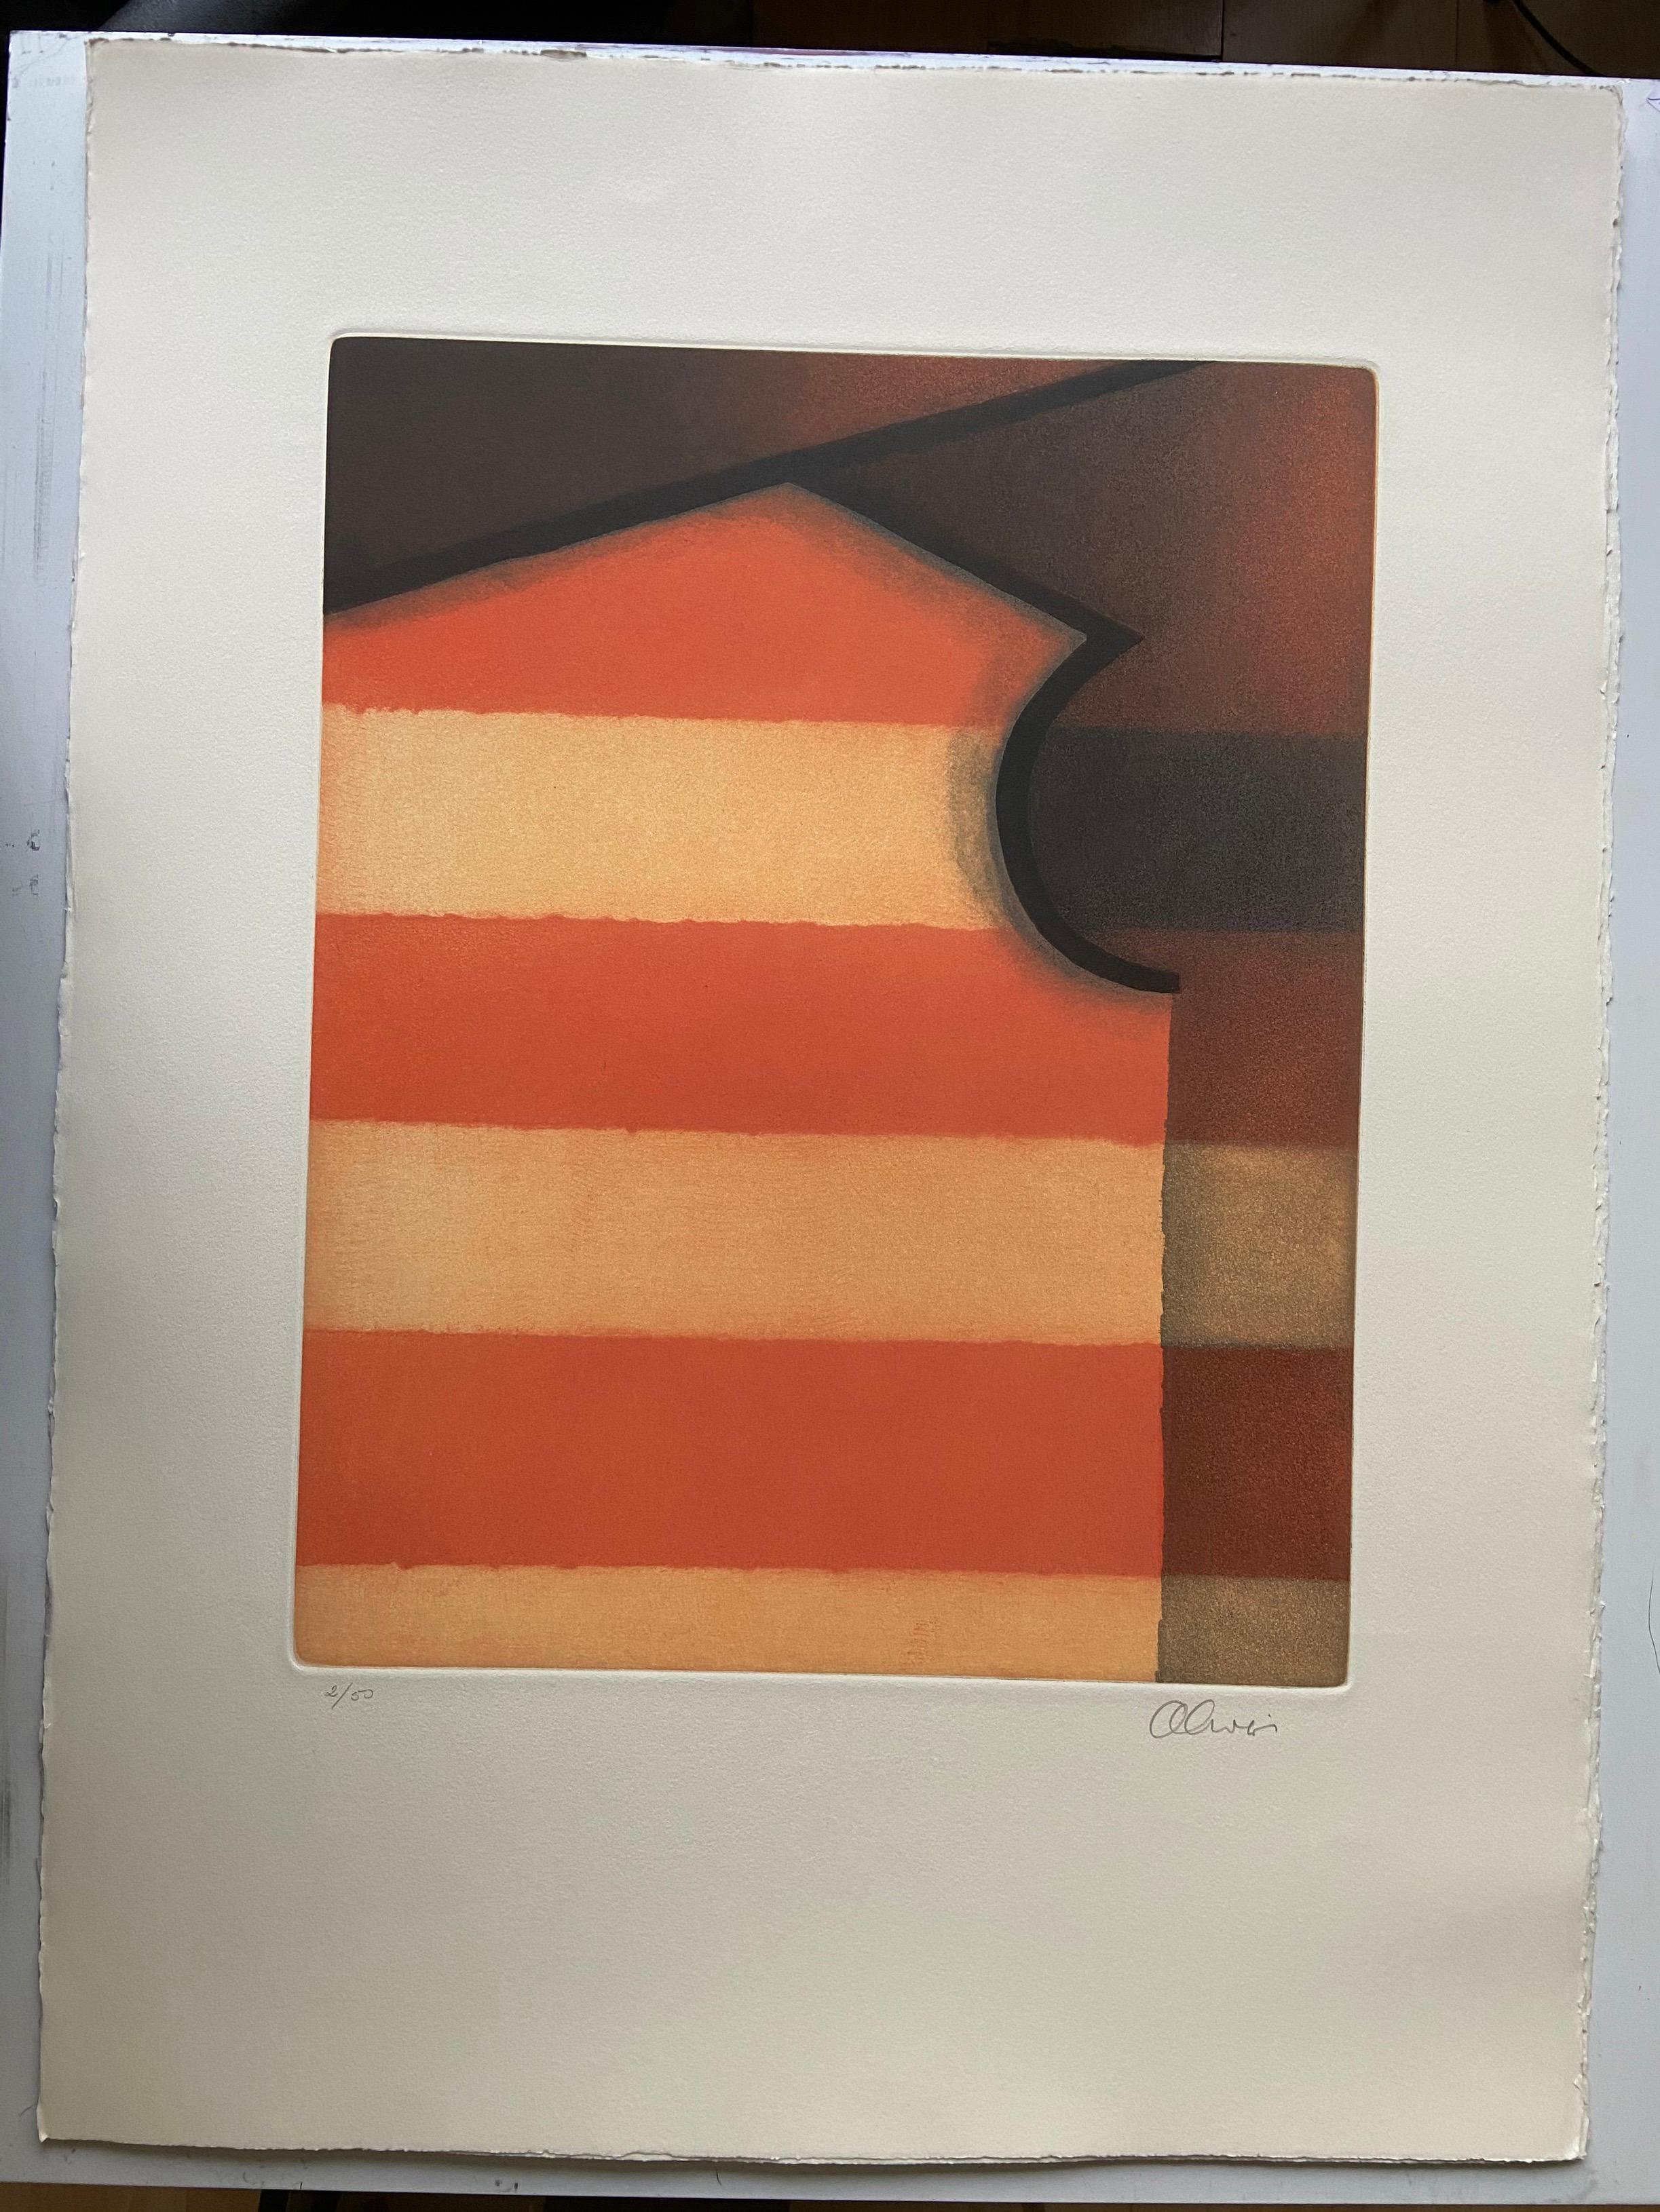 Perry Oliver Lithograph - Icono abanderado
Lithograph edited and printed by Poligrafa Barcelona in 1999
Signed and numbered 2/50
